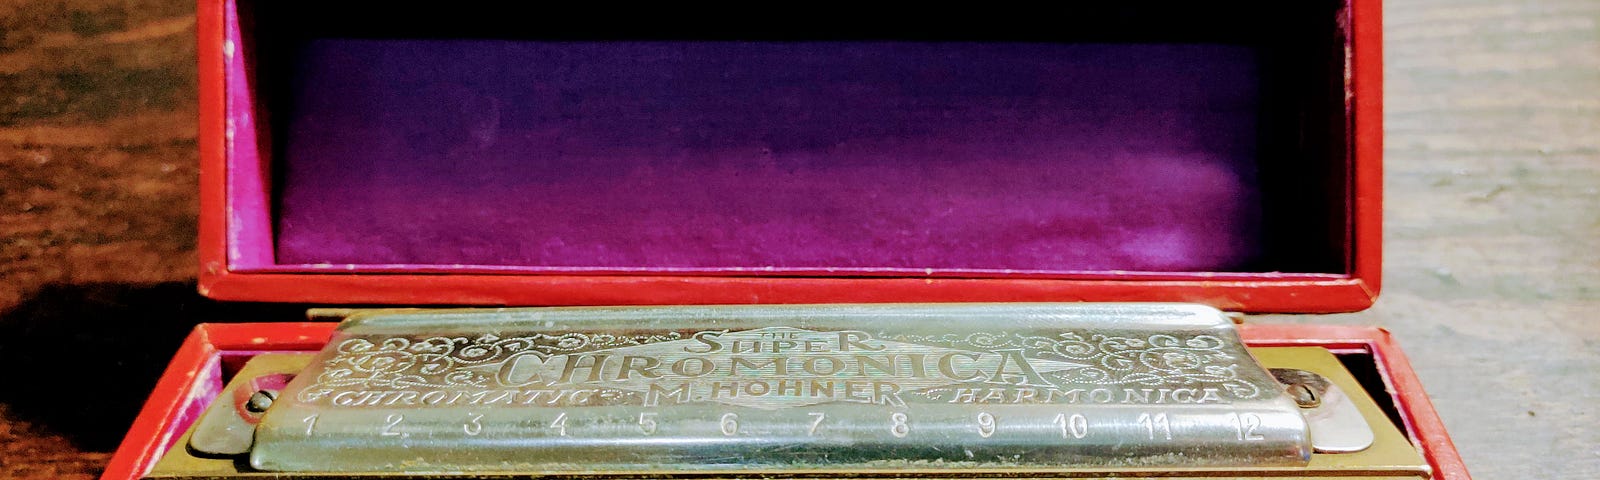 An antique metal Chromonica harmonica sitting in a wooden box with a purple internal lining and red trim.